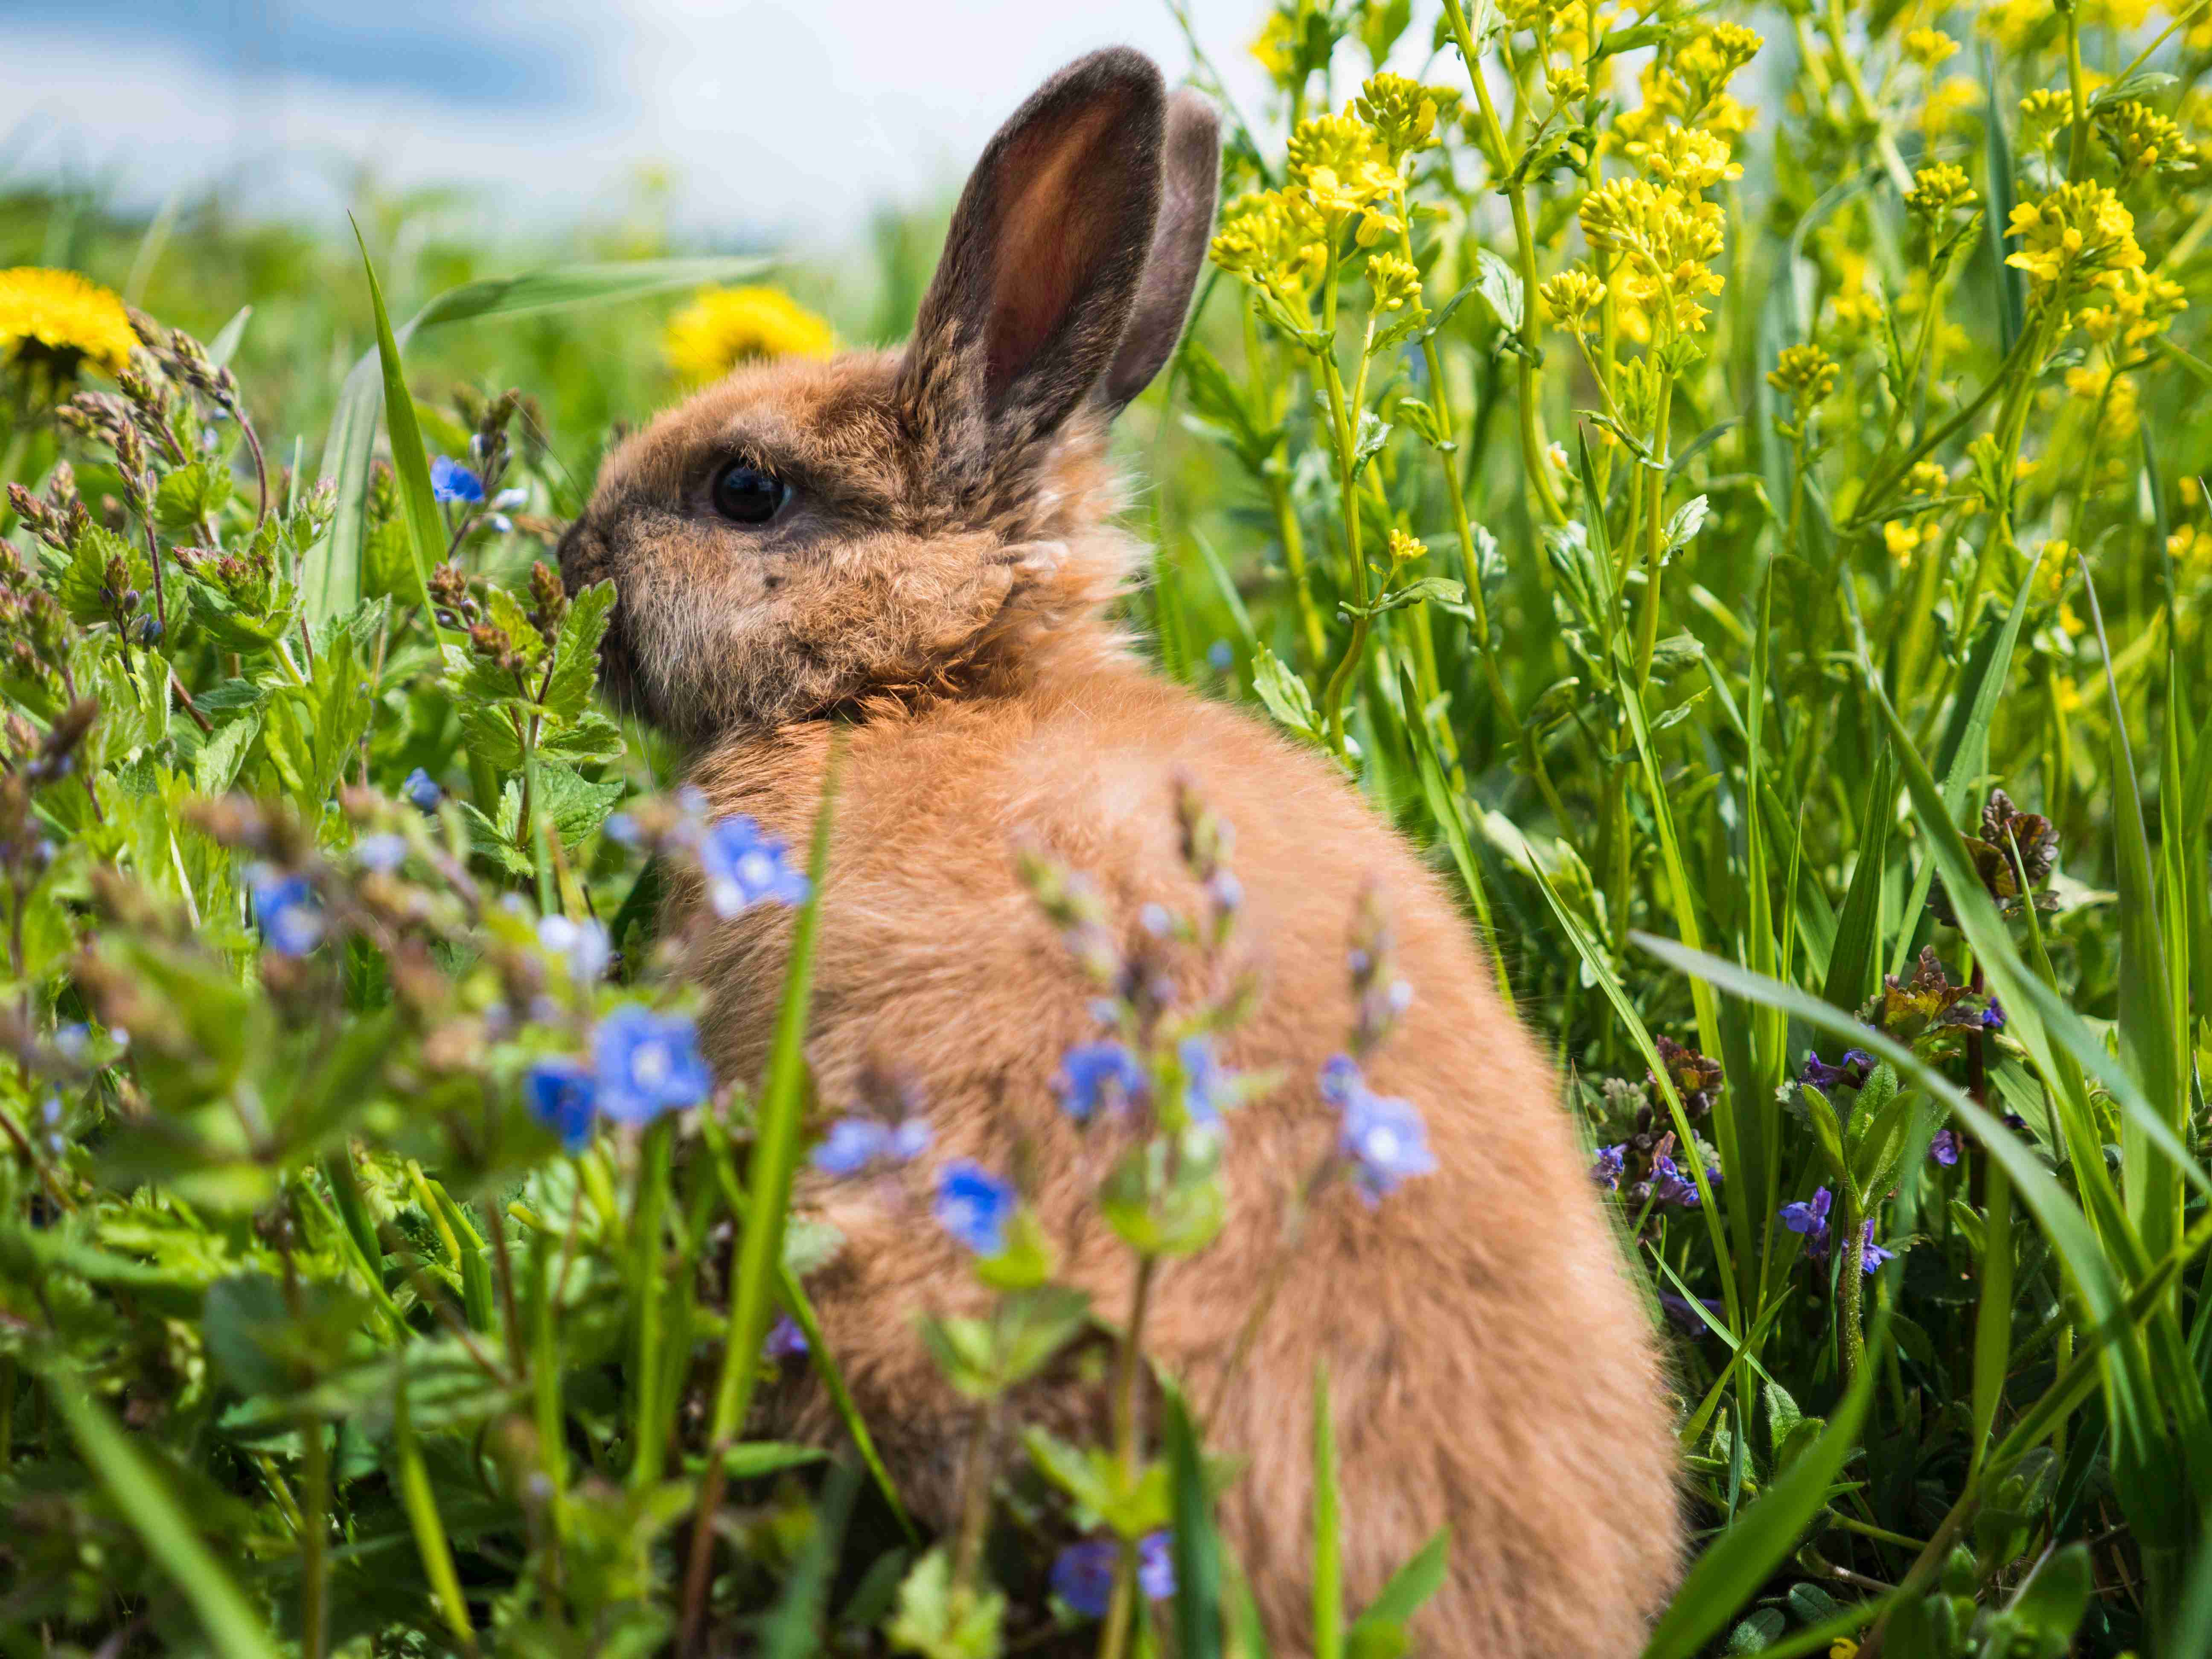 Is Your Pet Rabbit Suffering from Gastrointestinal Issues? Look Out for These Telltale Signs